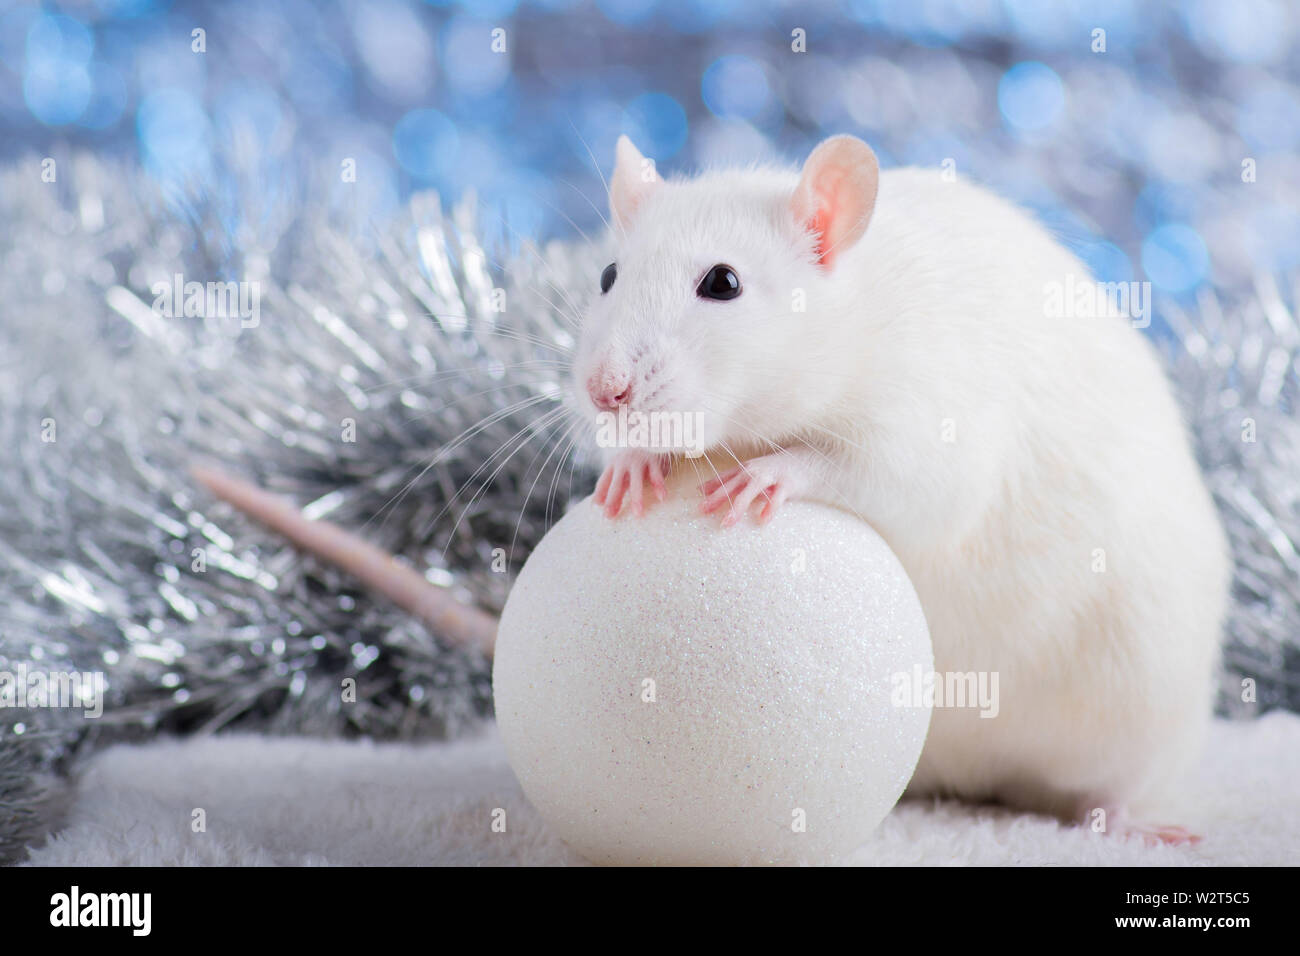 Happy New Year! Symbol of New Year 2020 - white or metal (silver) rat. Cute rat with Christmas decorated Stock Photo